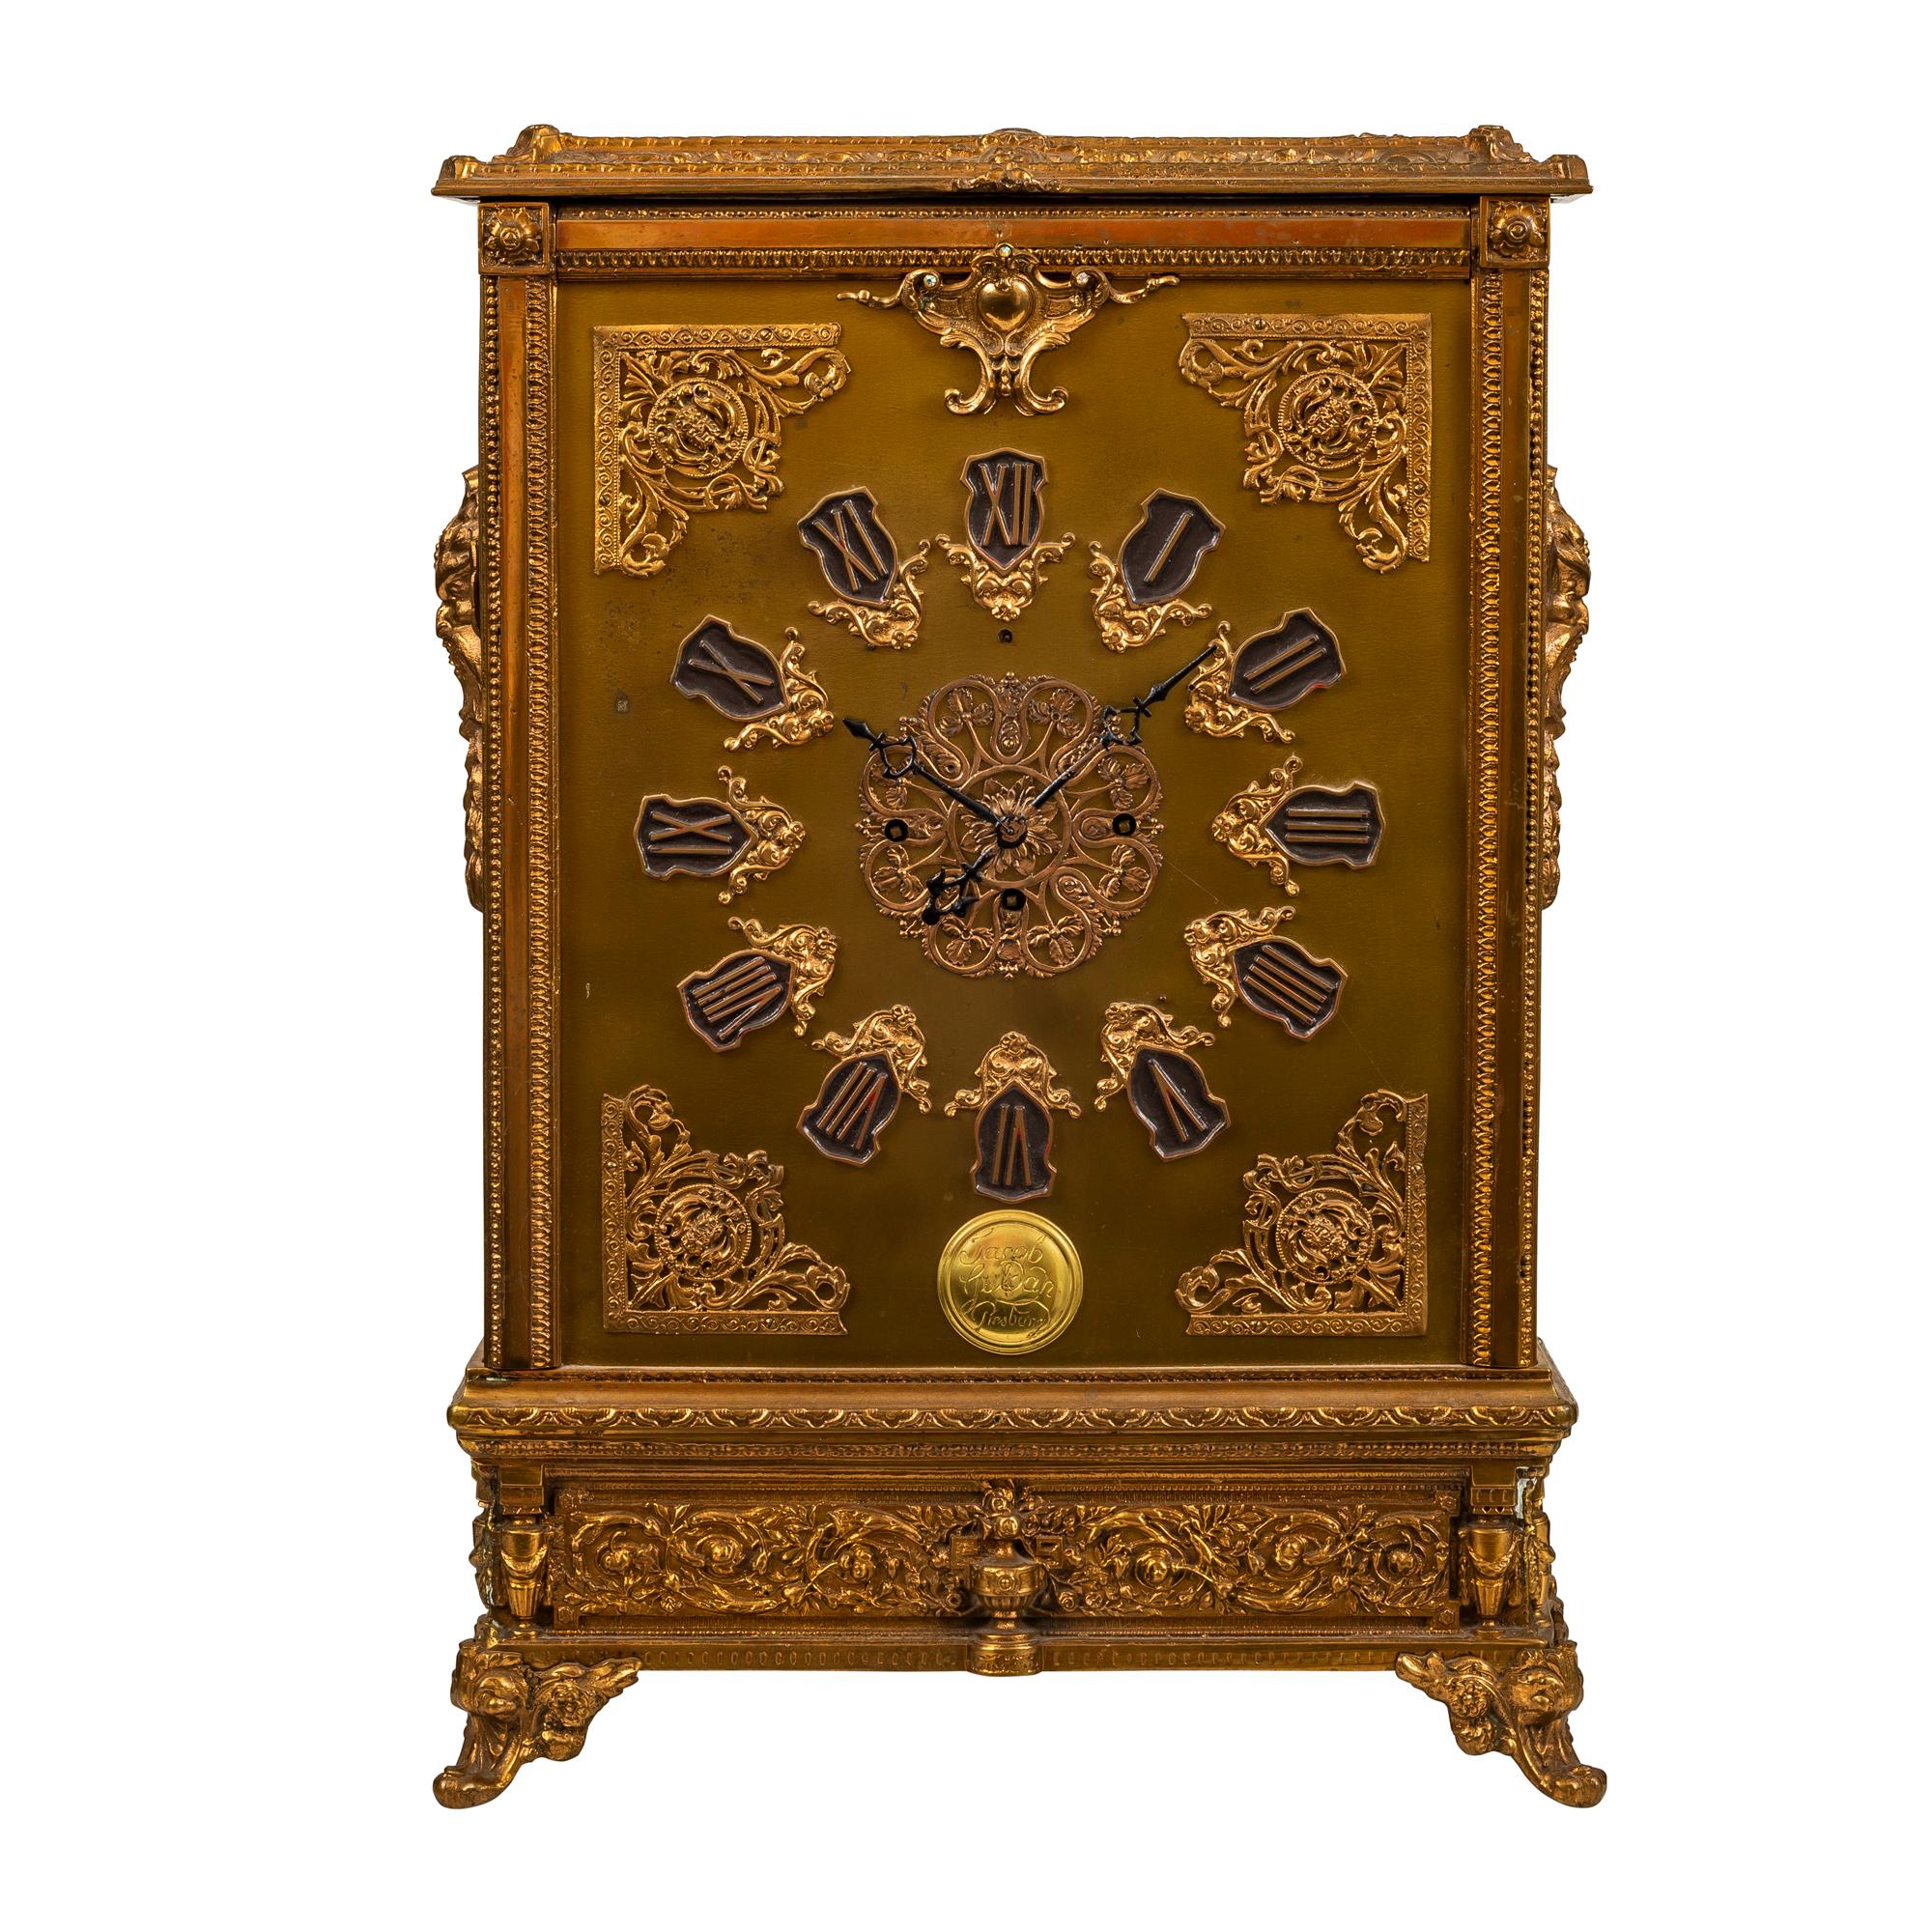 A brass table clock,Jacob Gulder, 20th century
9 1/2-inch dial with mask and scroll spandrels,the whole decorated in gilt with scrolls, trellis and masks
Measures: Height 20 in., width 14 in., depth 4 1/2 in. 
H 50.8 cm. , W 16.5 cm. , D 11.4 cm.